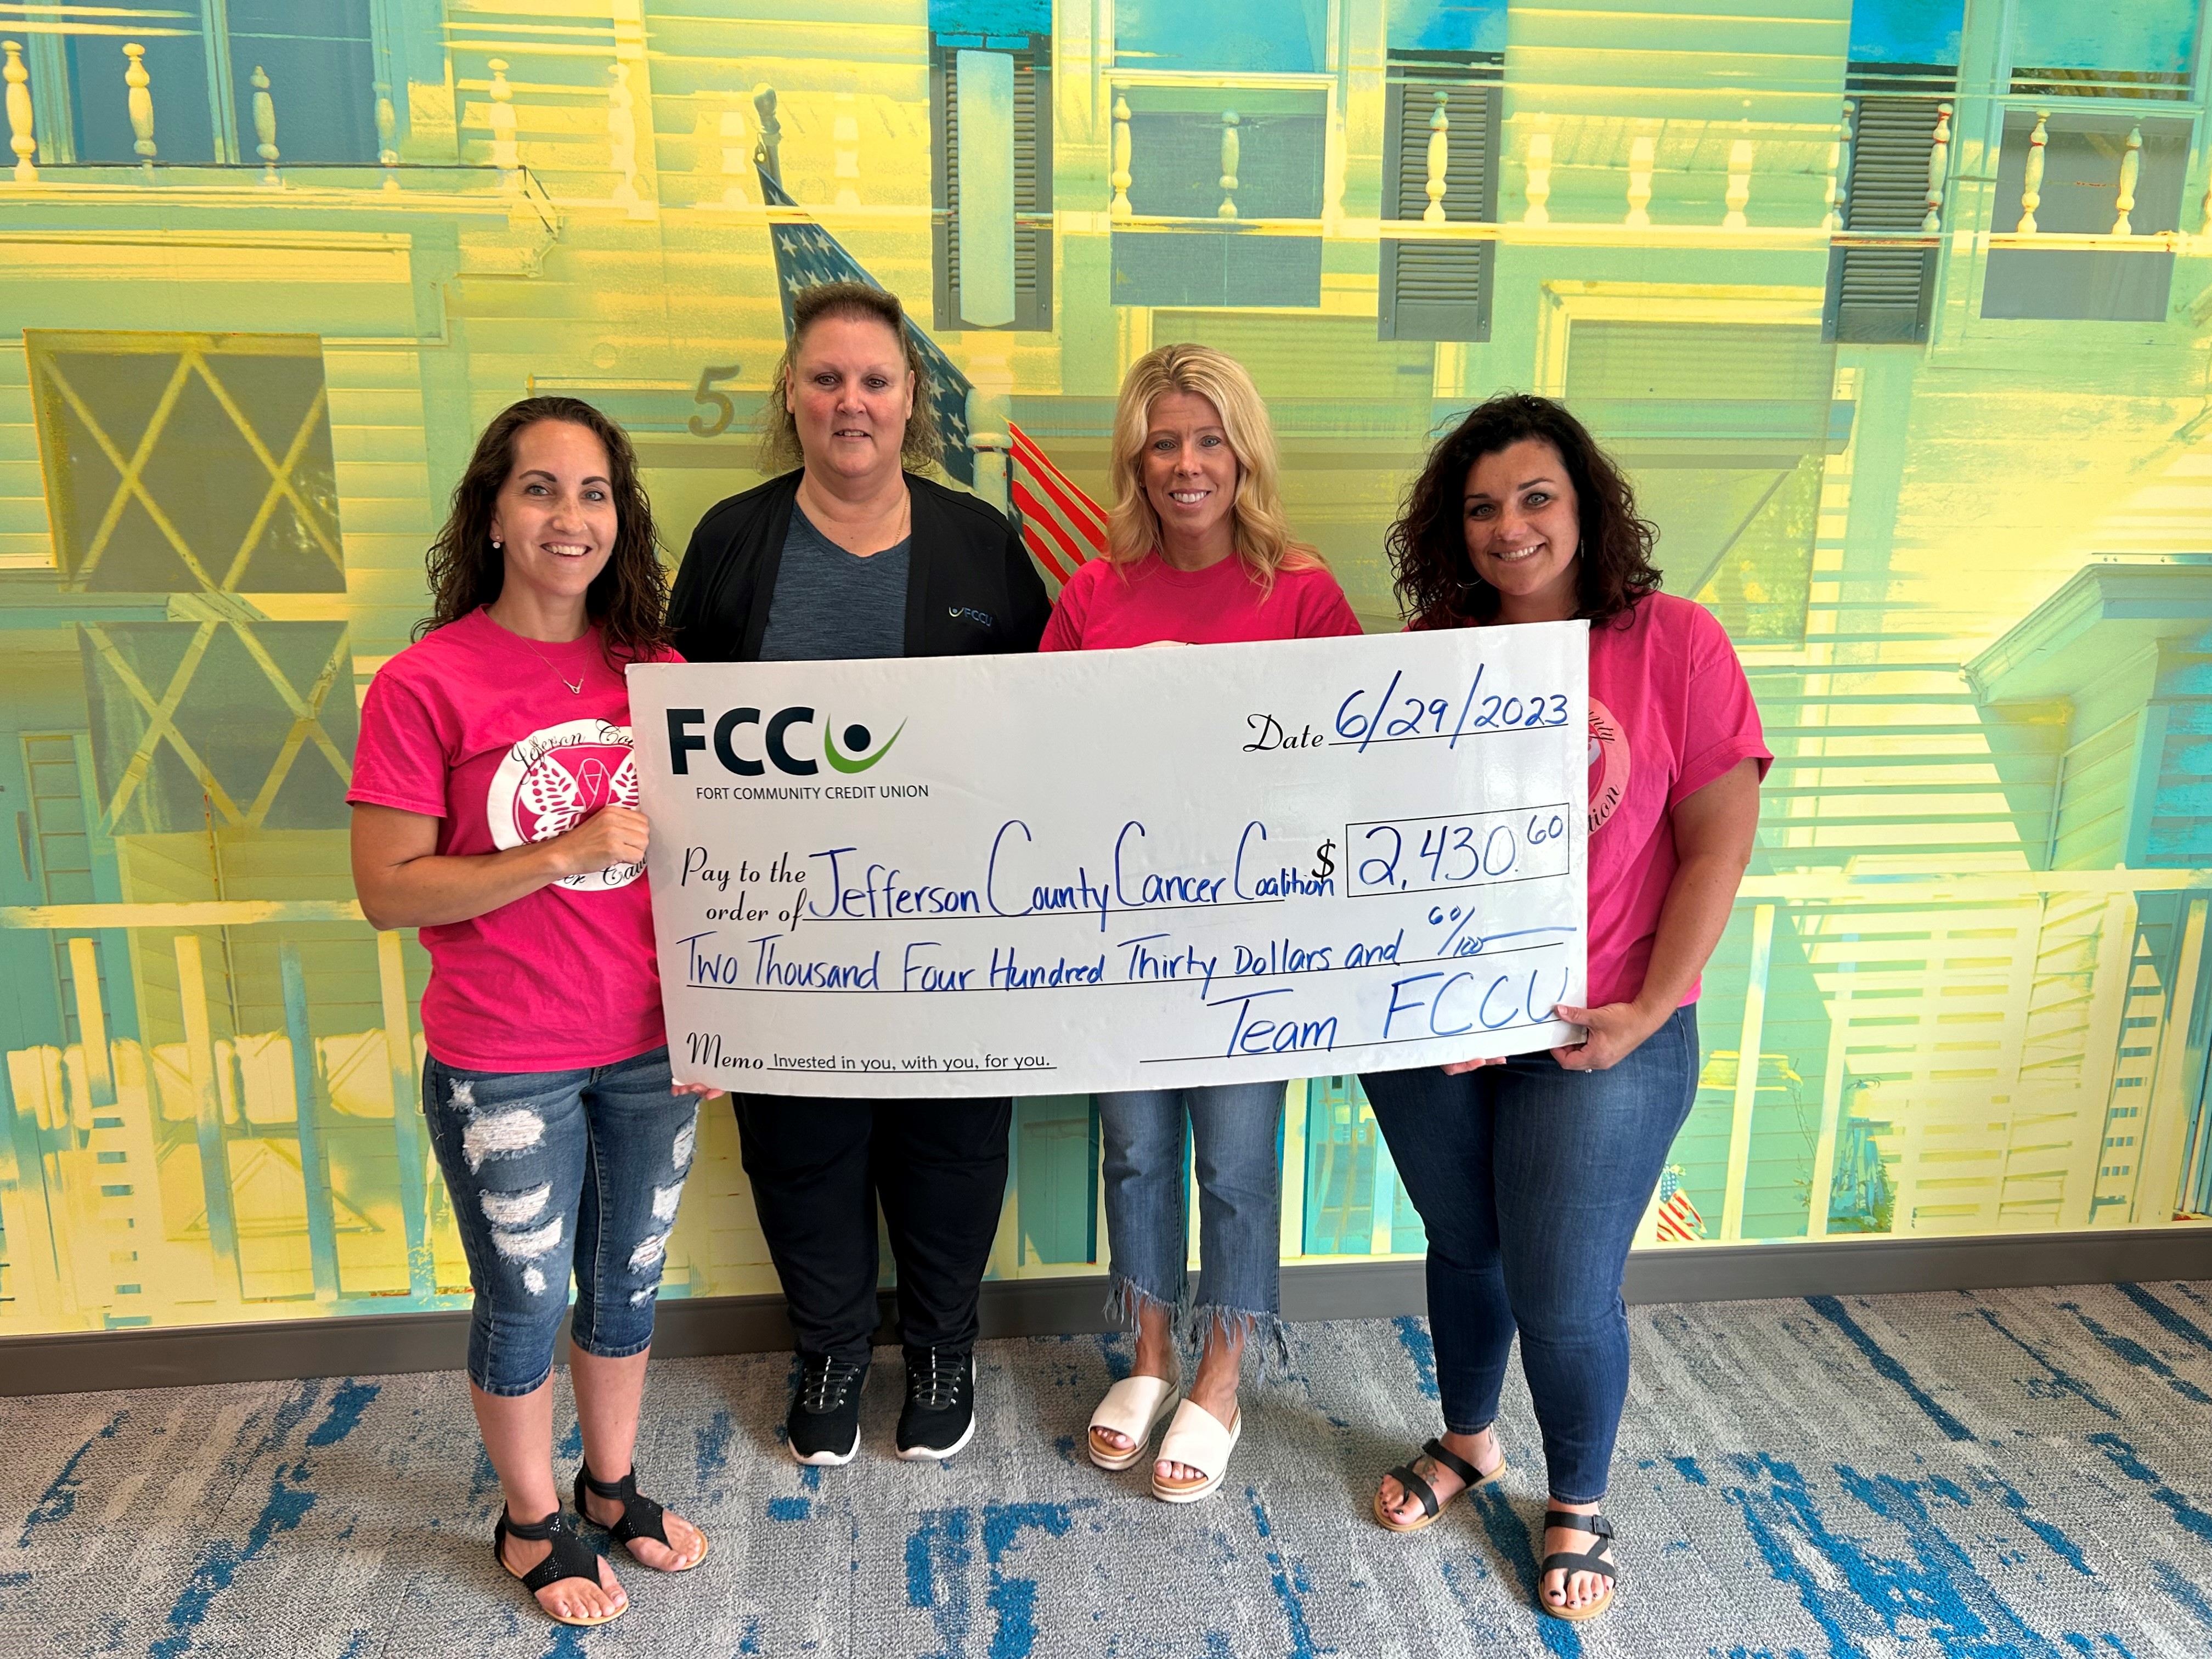 Photo of four women holding a giant check paid to the order of Jefferson County Cancer Coalition for $2430.60